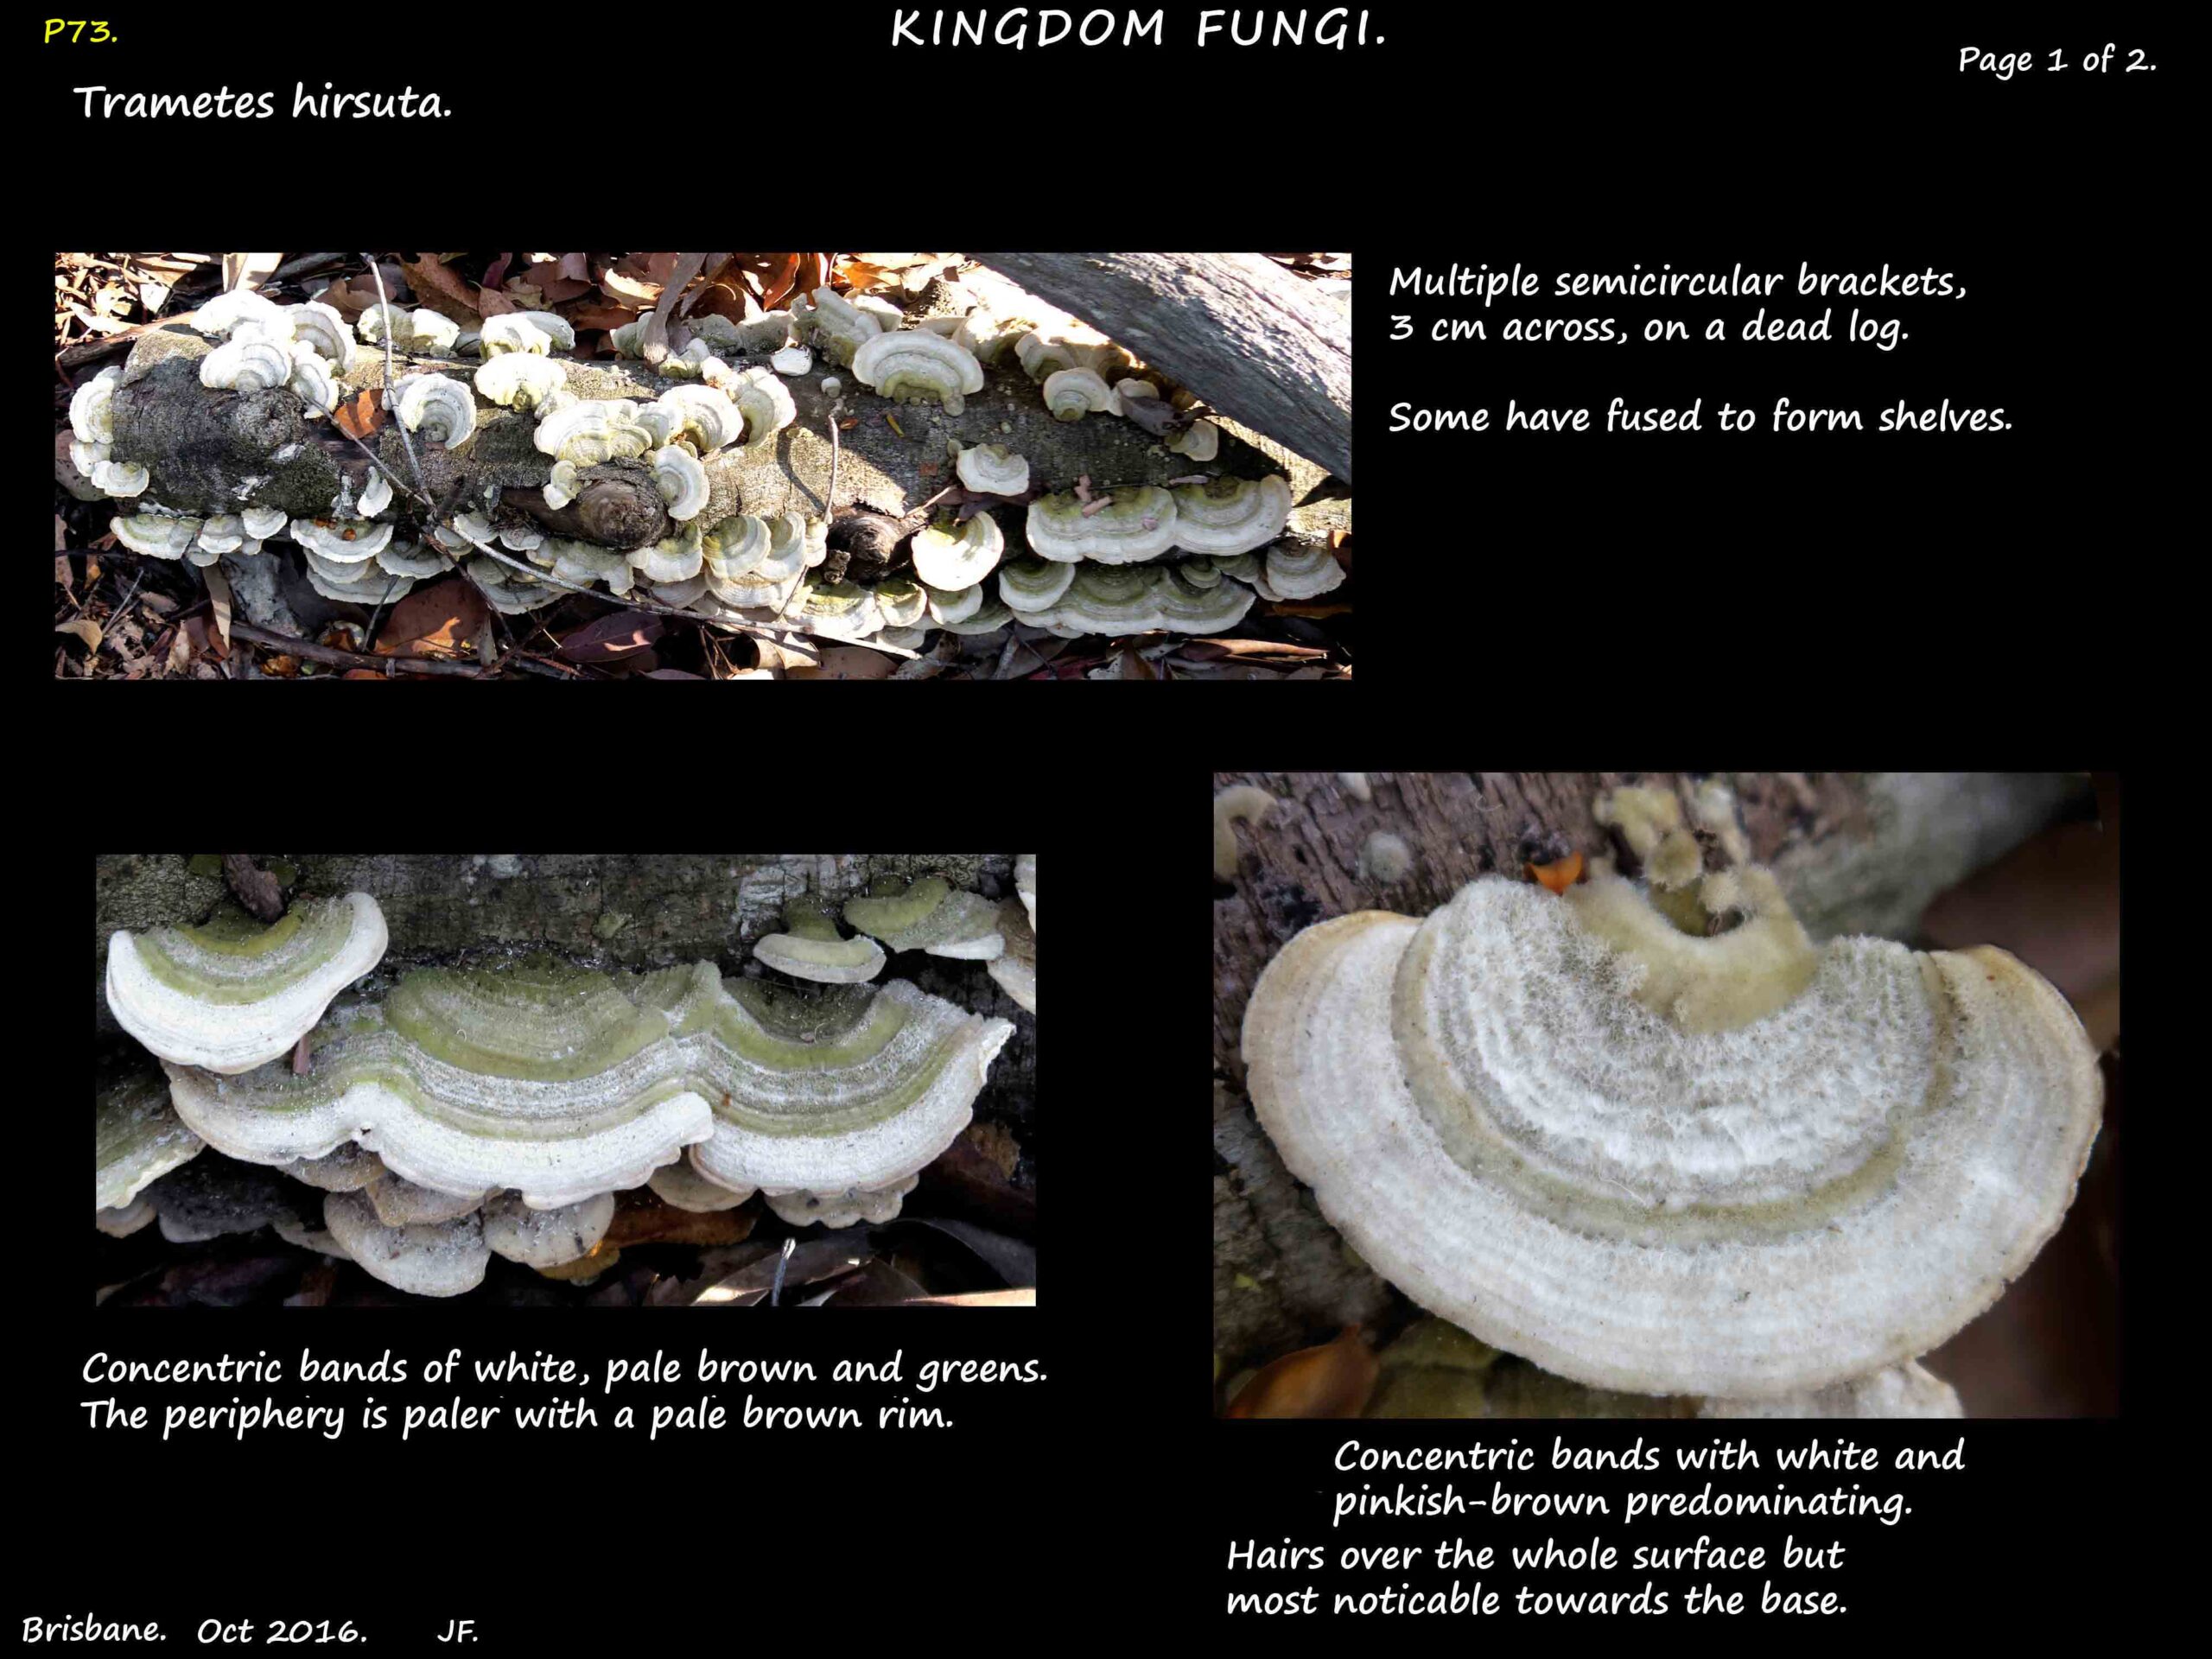 2a Pale bands on the fused caps of Trametes hirsuta fruit bodies